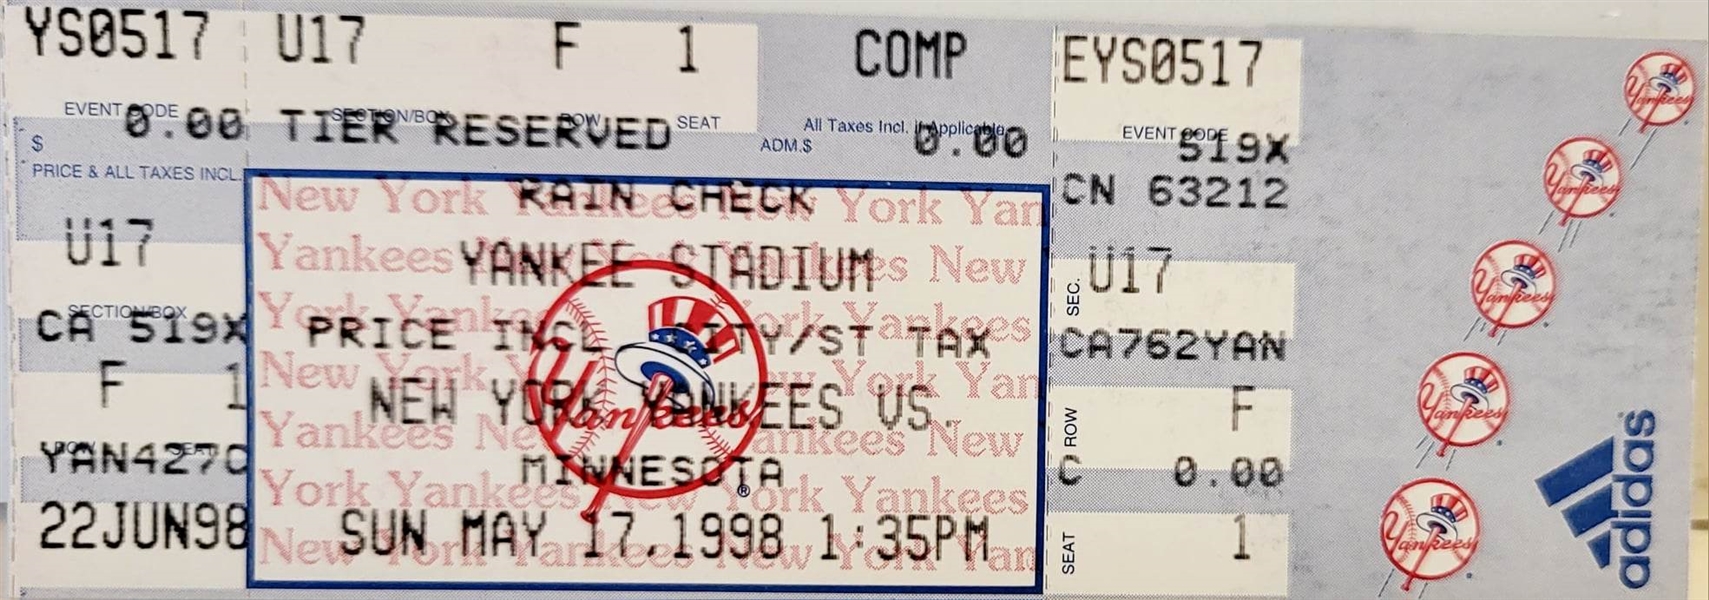 New York Yankees David Wells Unsigned Perfect Game Ticket 5-17-98